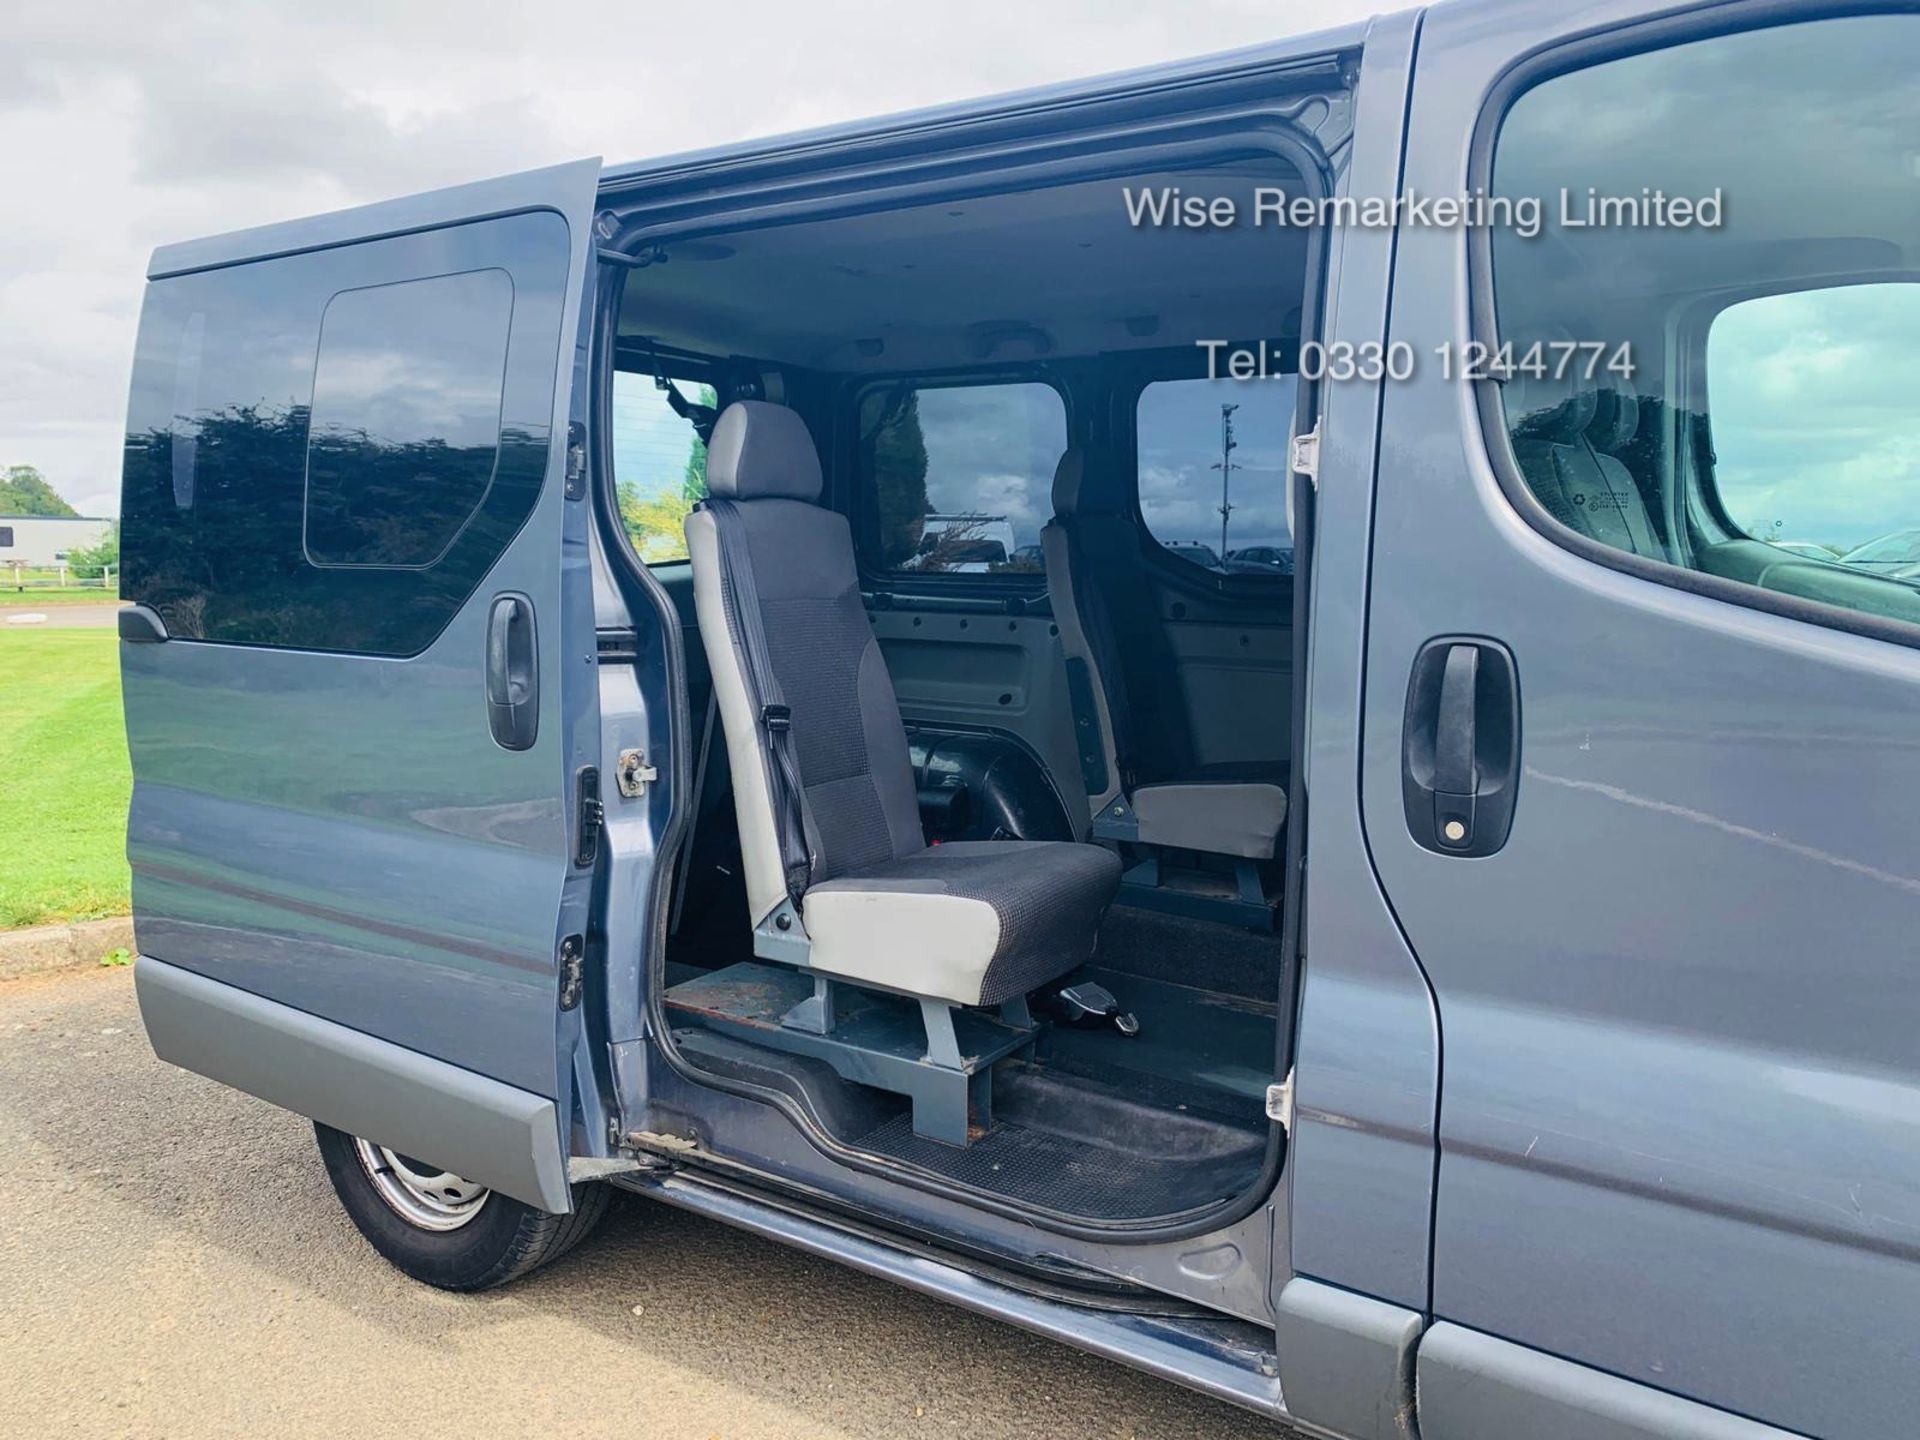 Vauxhall Vivaro 2.0 CDTI 2900 Minibus - 2014 Model - Wheel Chair Access -1 Owner From New -History - Image 19 of 21